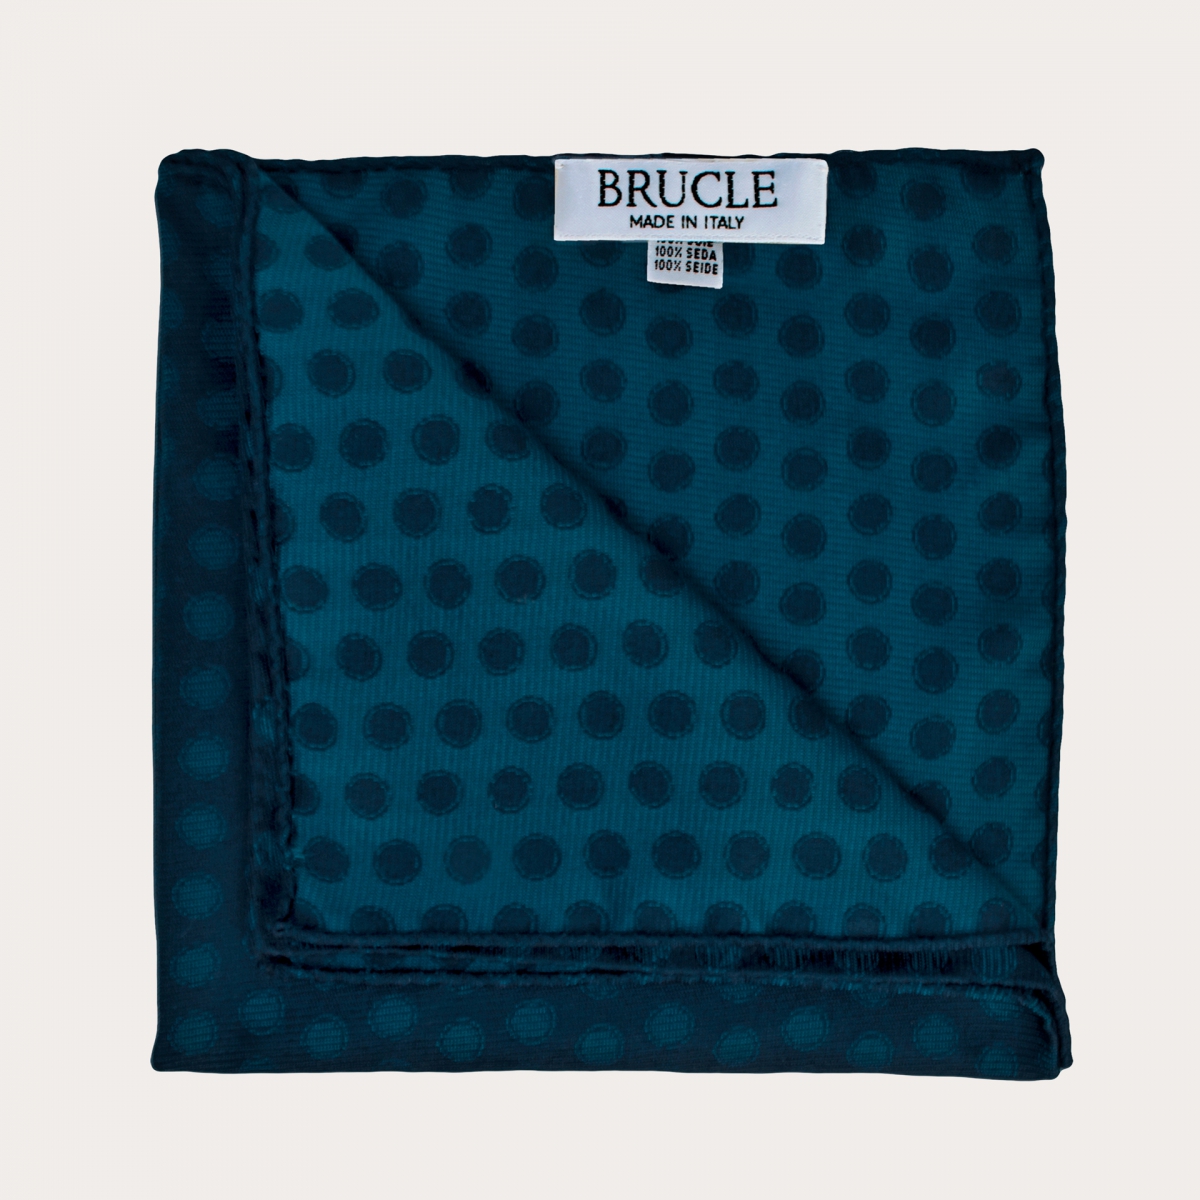 BRUCLE Elegant men's pocket square in jacquard silk, blue with petrol-colored polka dots